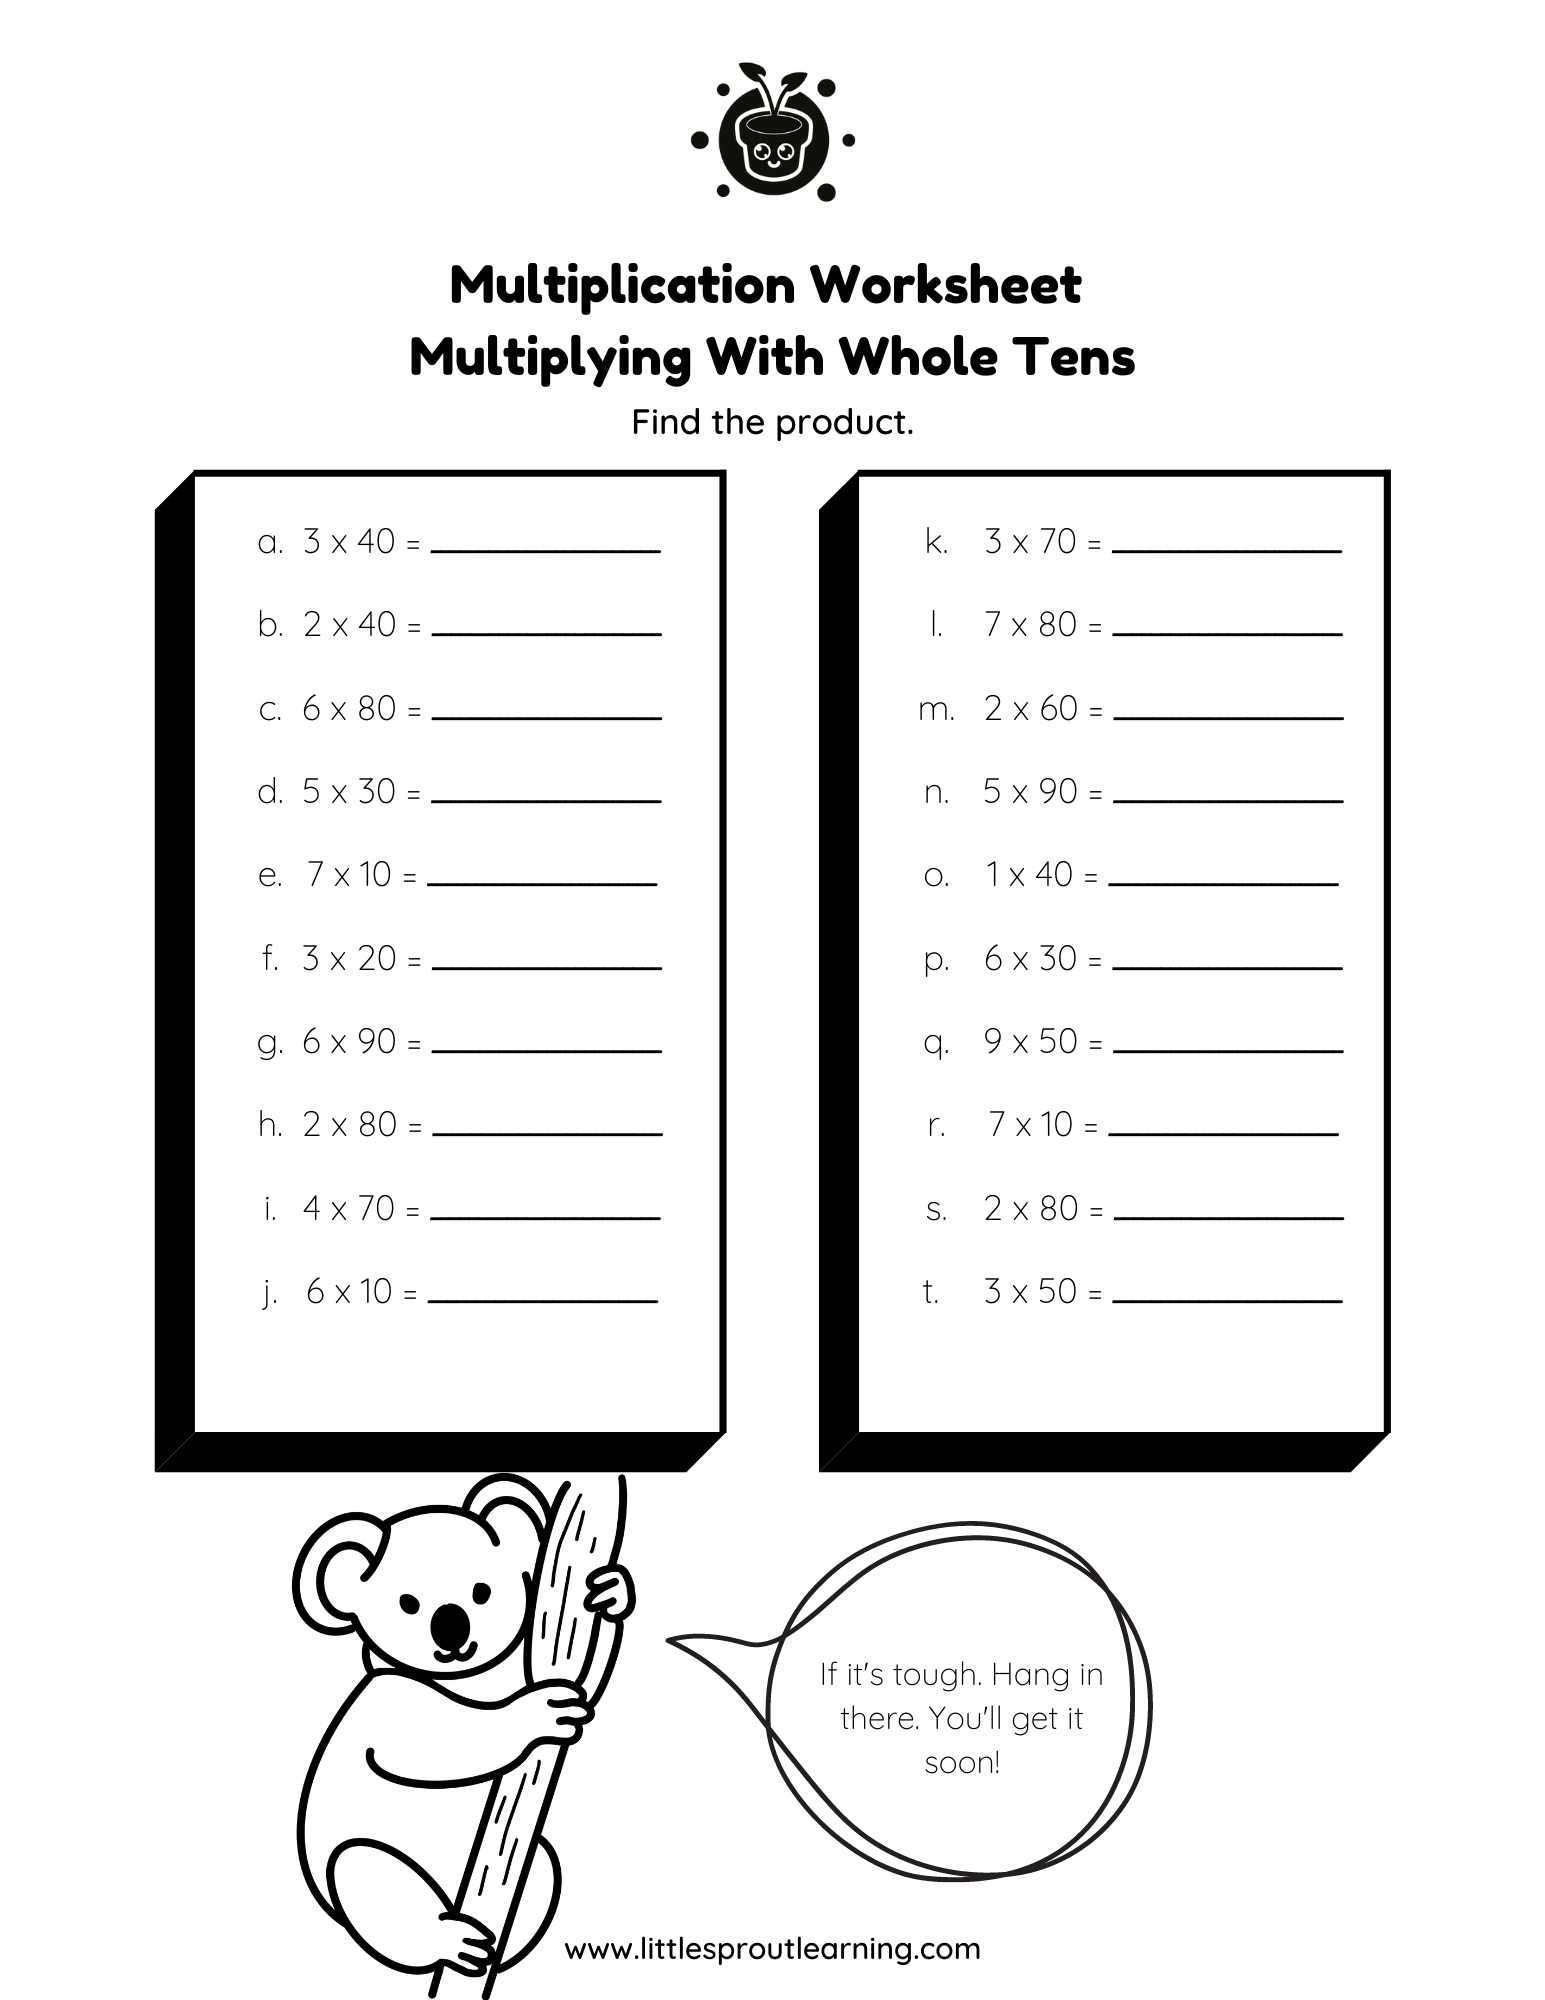 Multiplication Worksheet Multiplying With Whole Tens